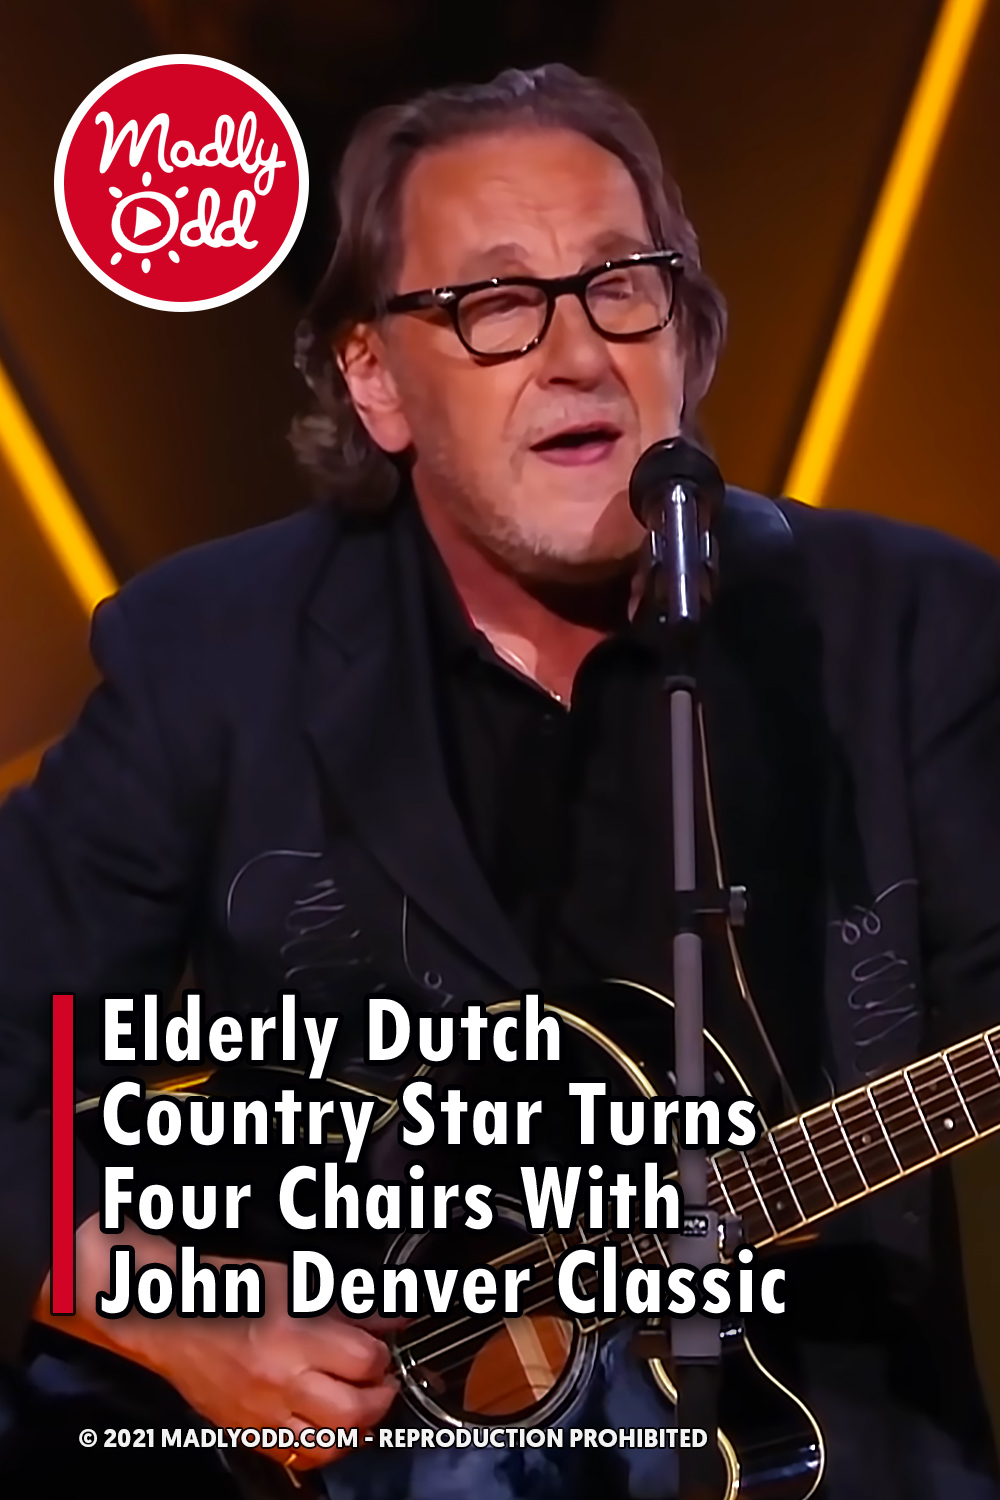 Senior Dutch Country Star Turns Four Chairs With John Denver Classic